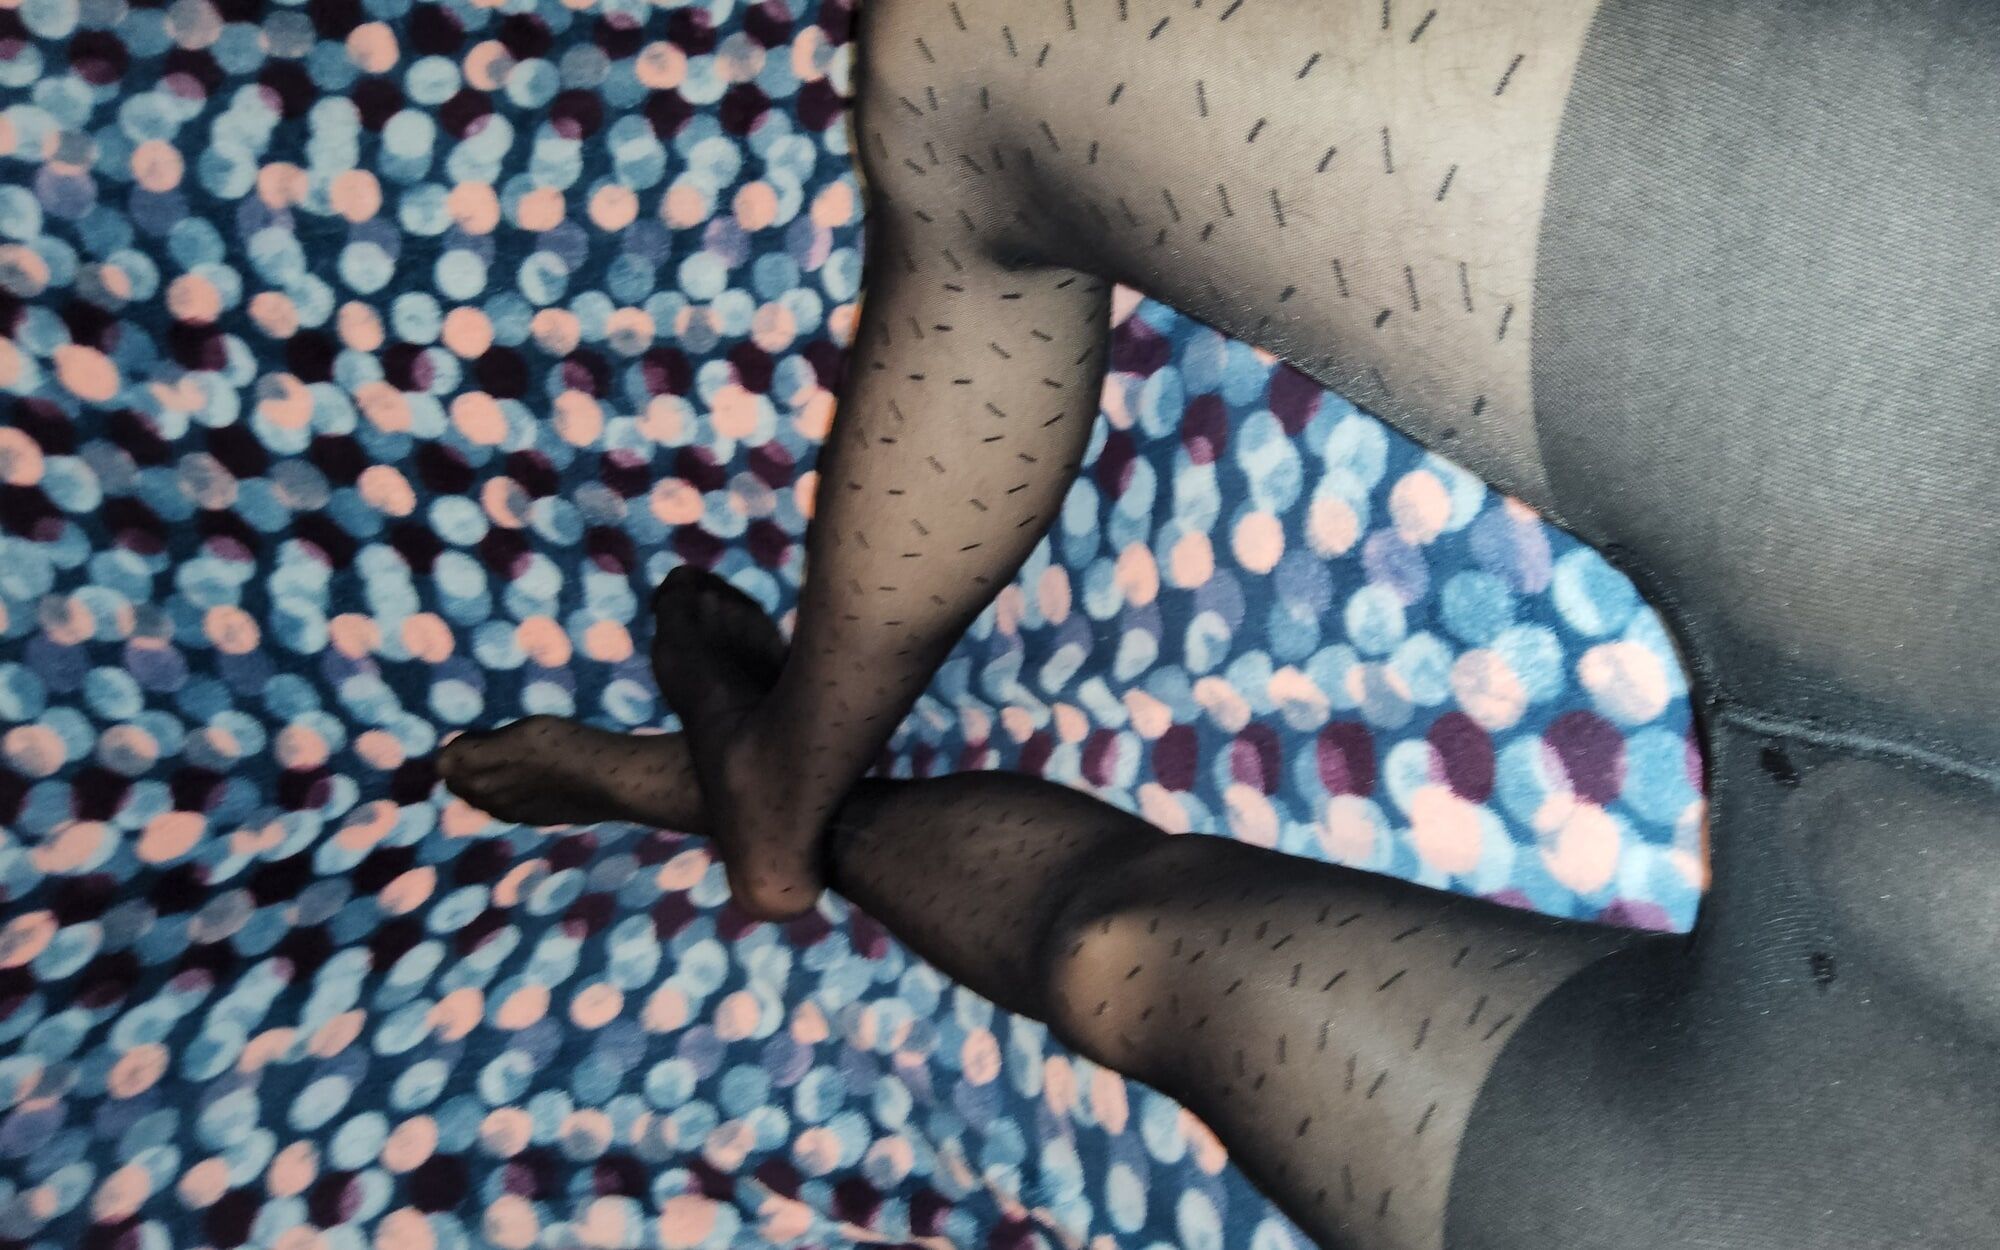 Another Black Pantyhose #2